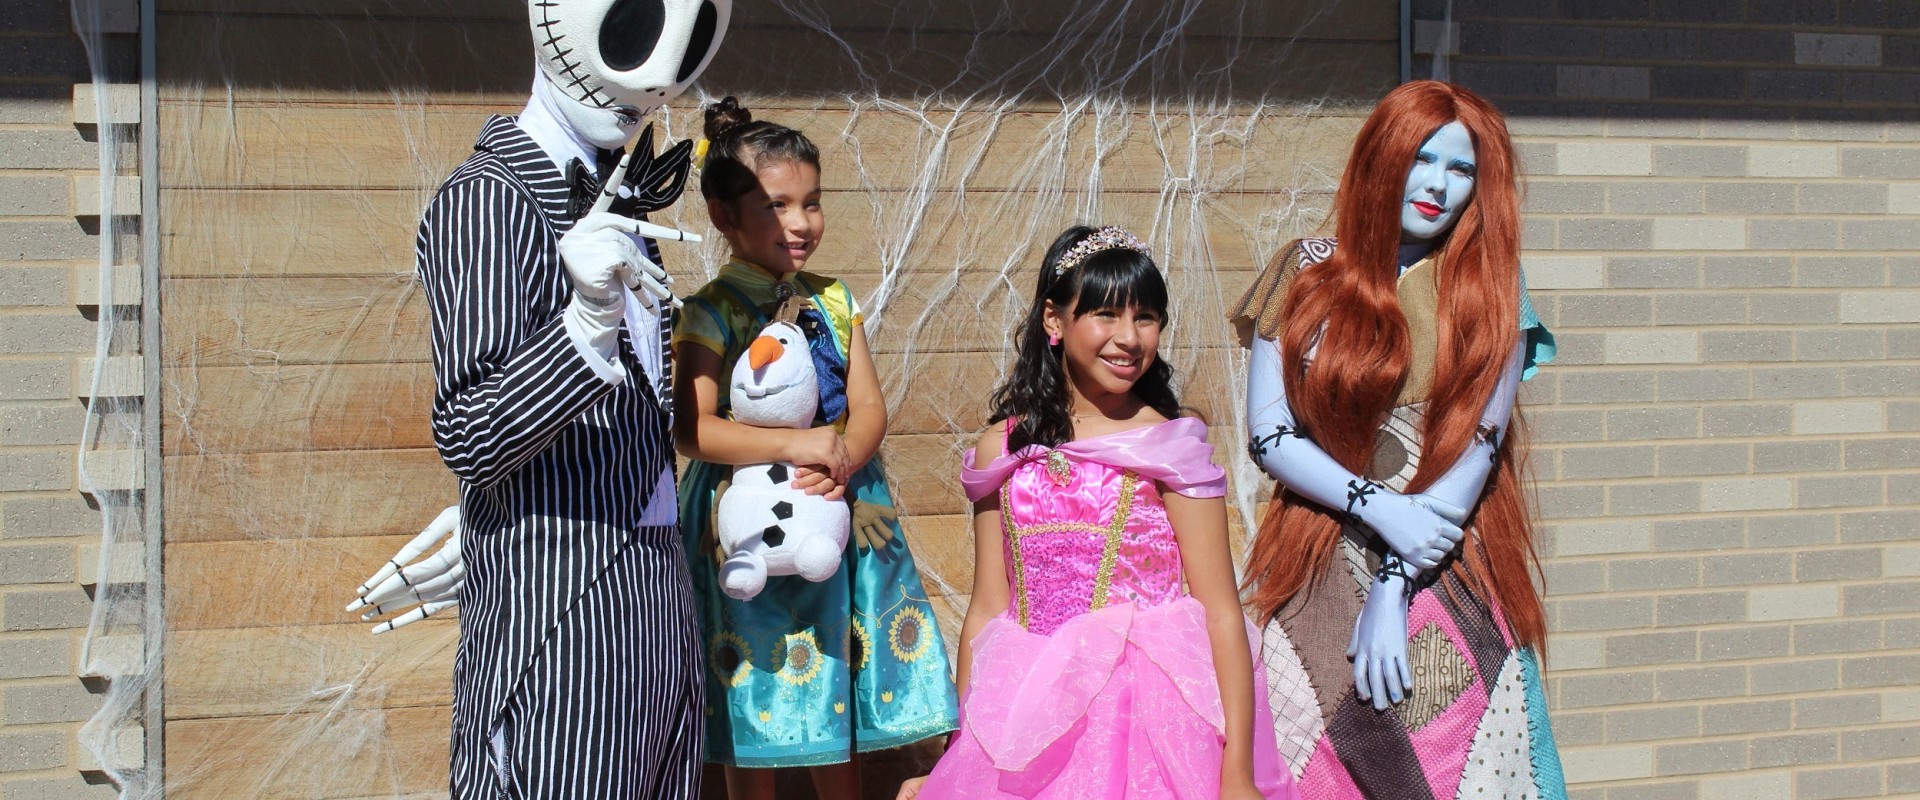 Celebrate Halloween in Oklahoma City with the Best Costume Contest Events